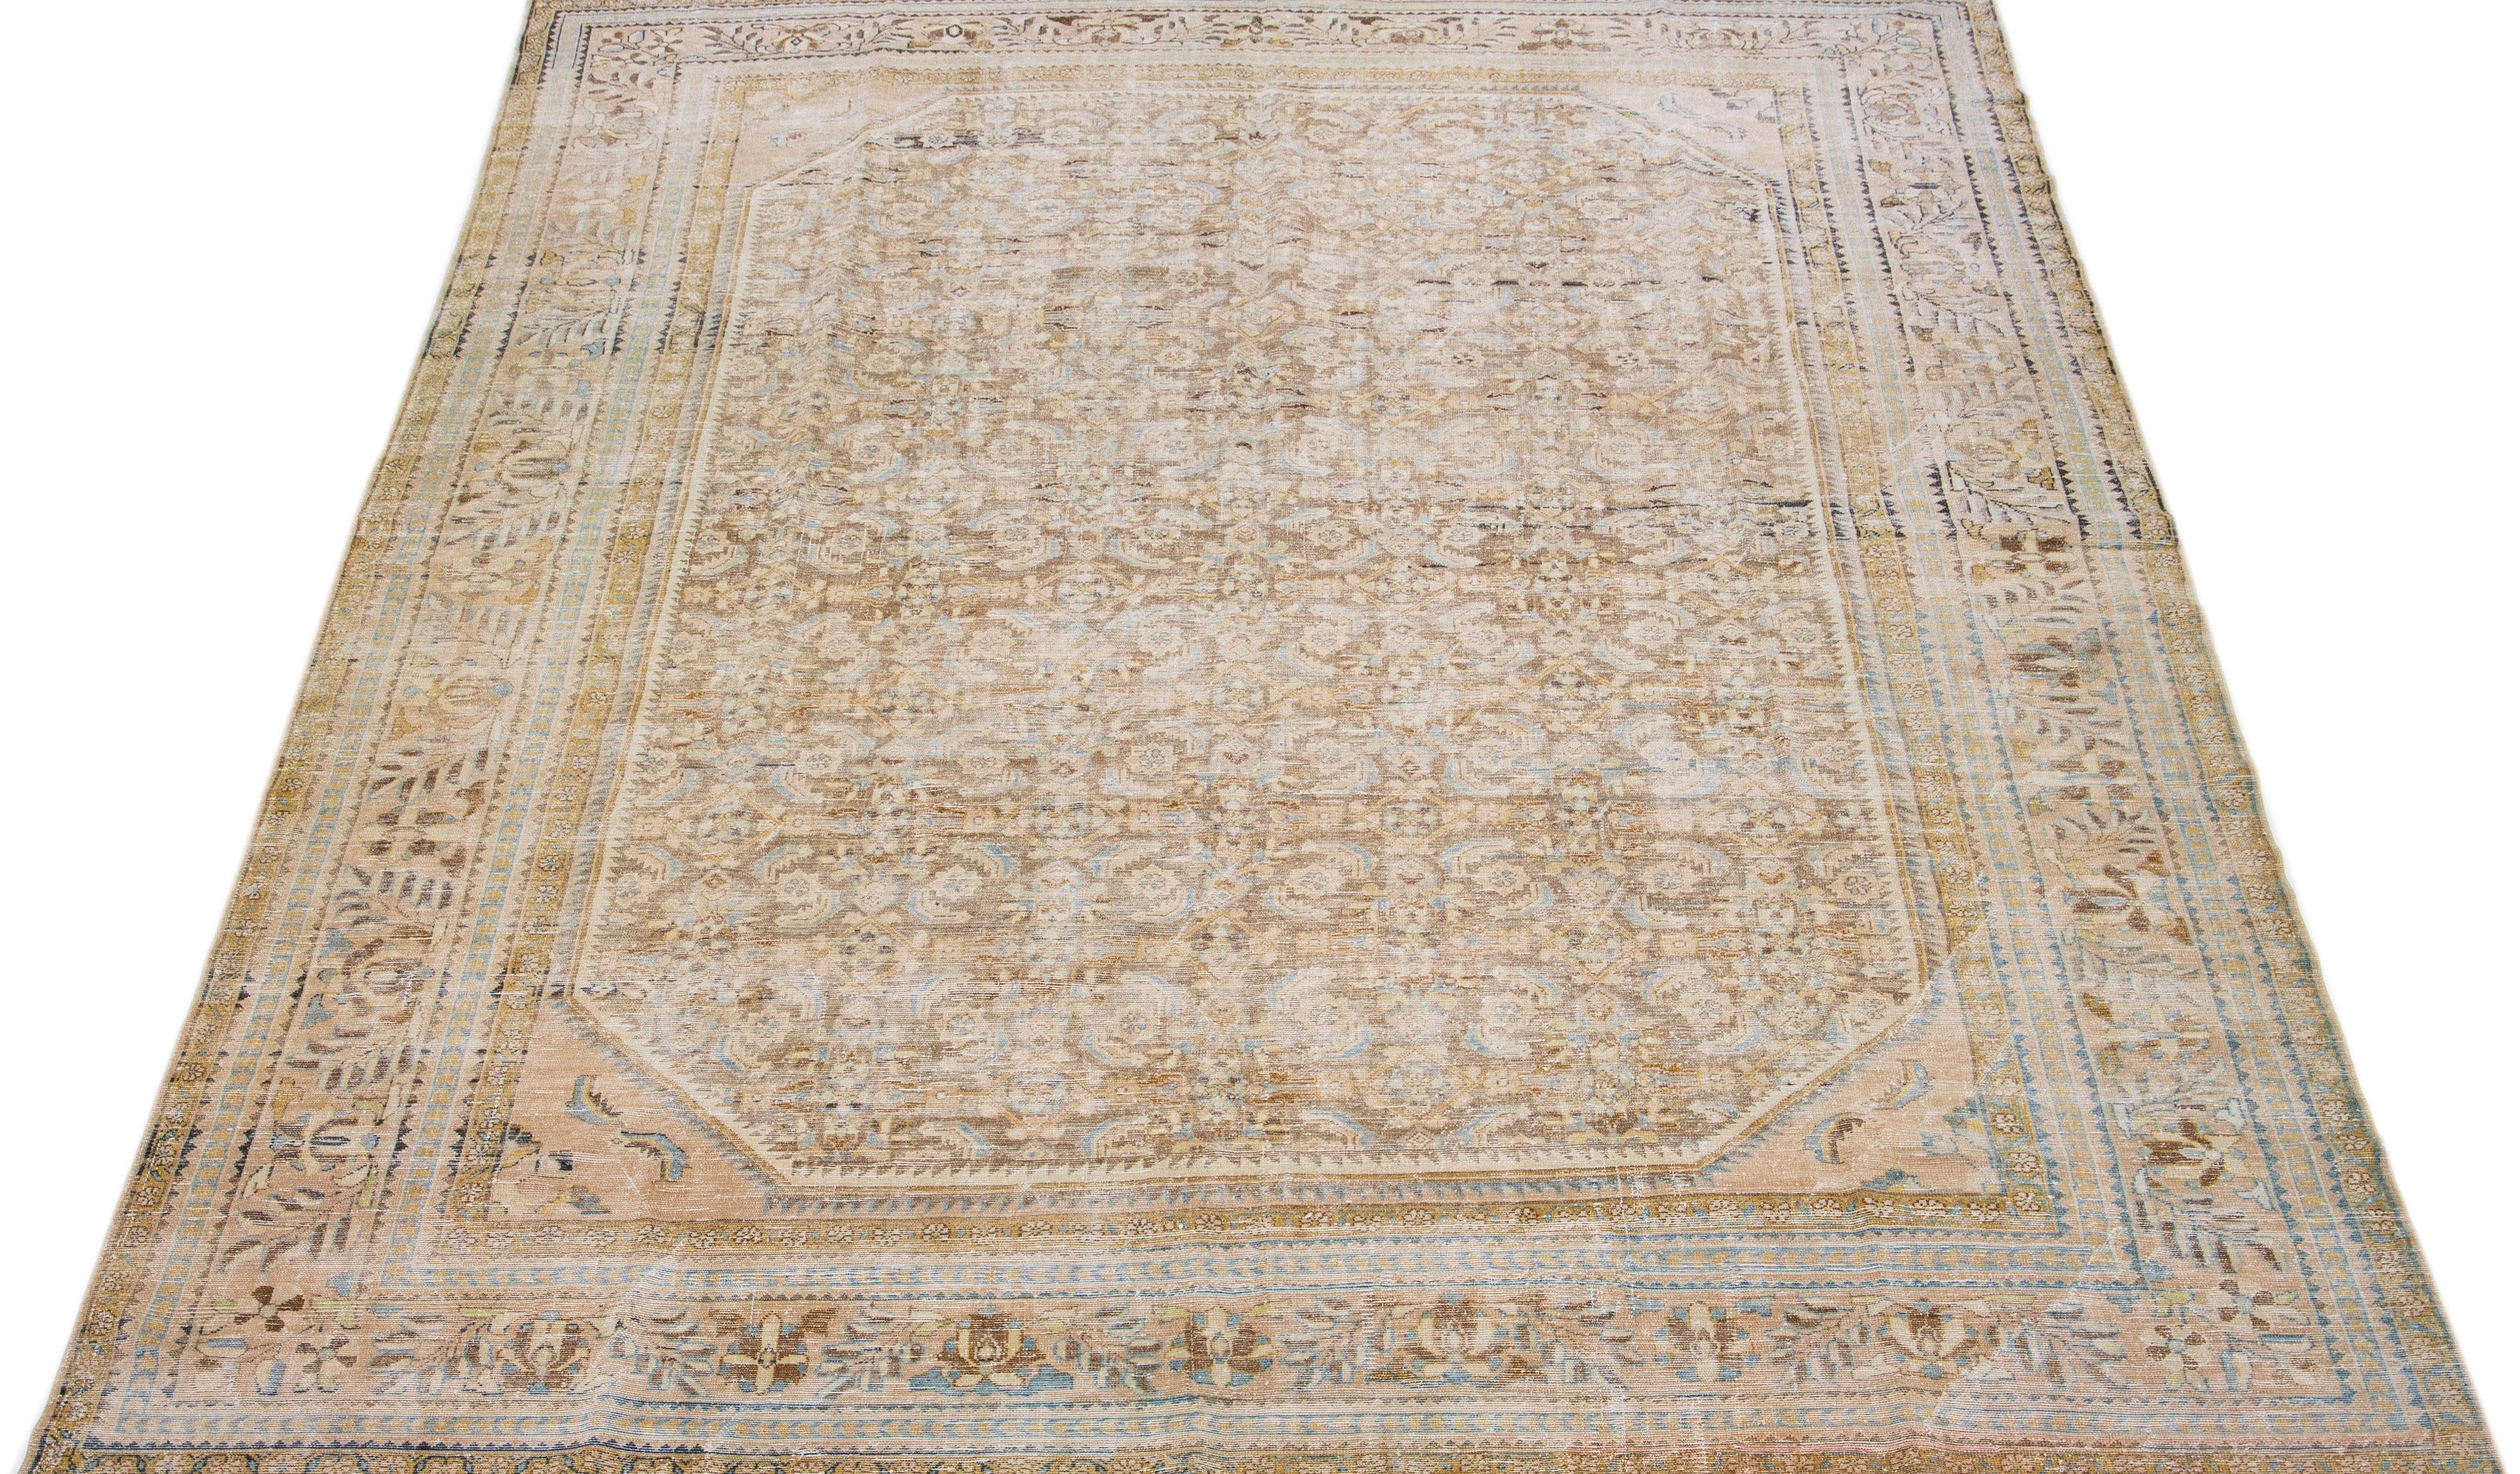 Beautiful antique Malayer hand-knotted wool rug with a tan color field. This Persian rug has blue, brown, and goldenrod accents in a gorgeous traditional floral design.

This rug measures: 9'10